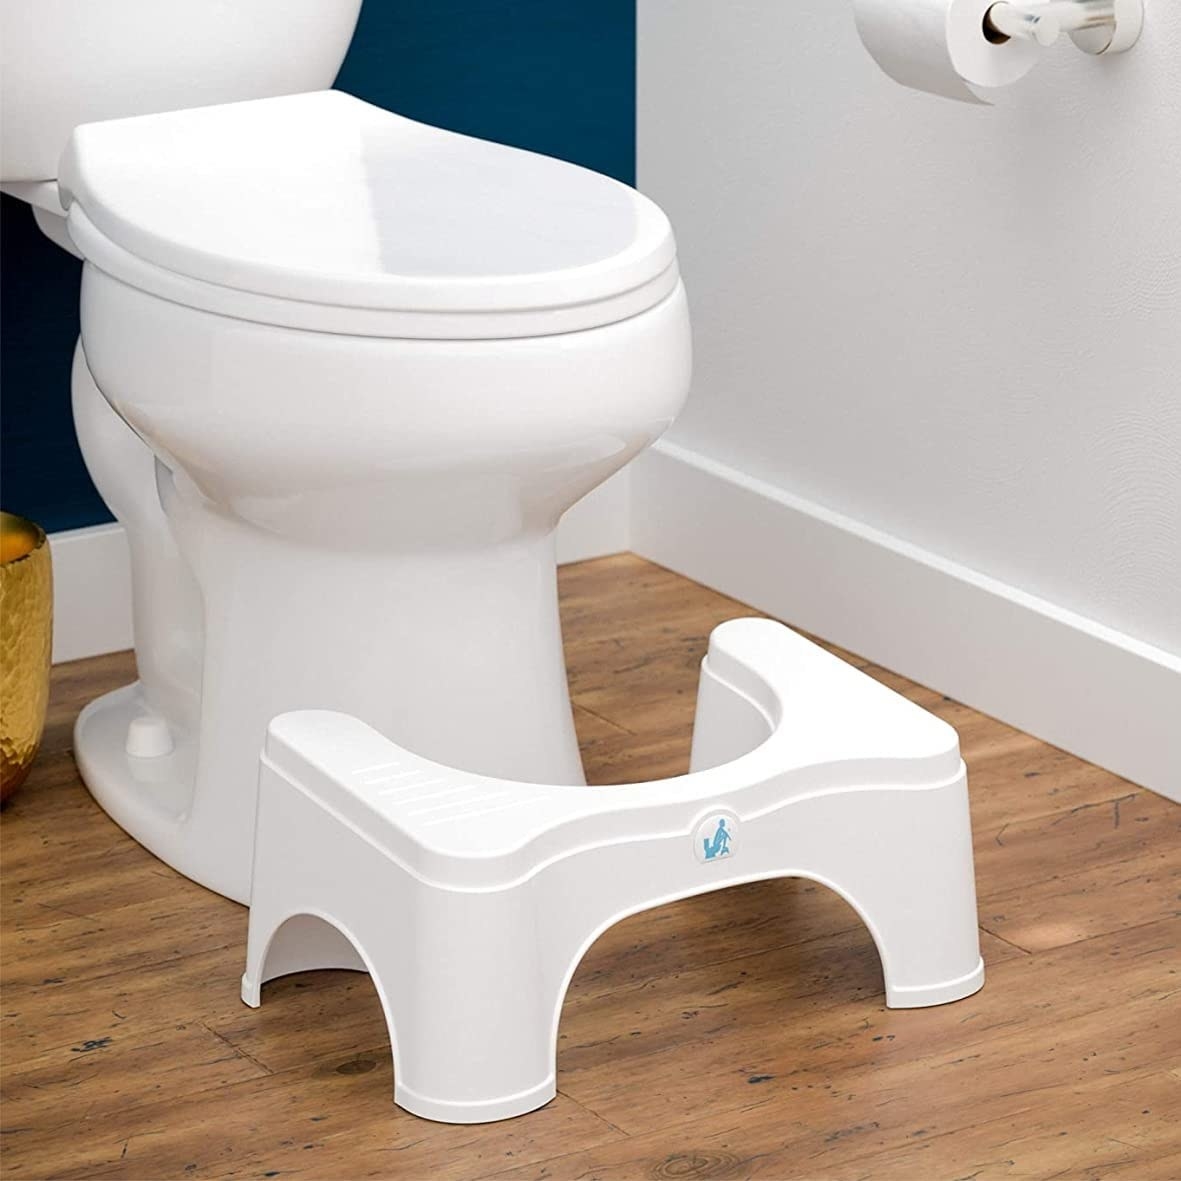 The Squatty Potty stool set in front of a toilet with the lid closed